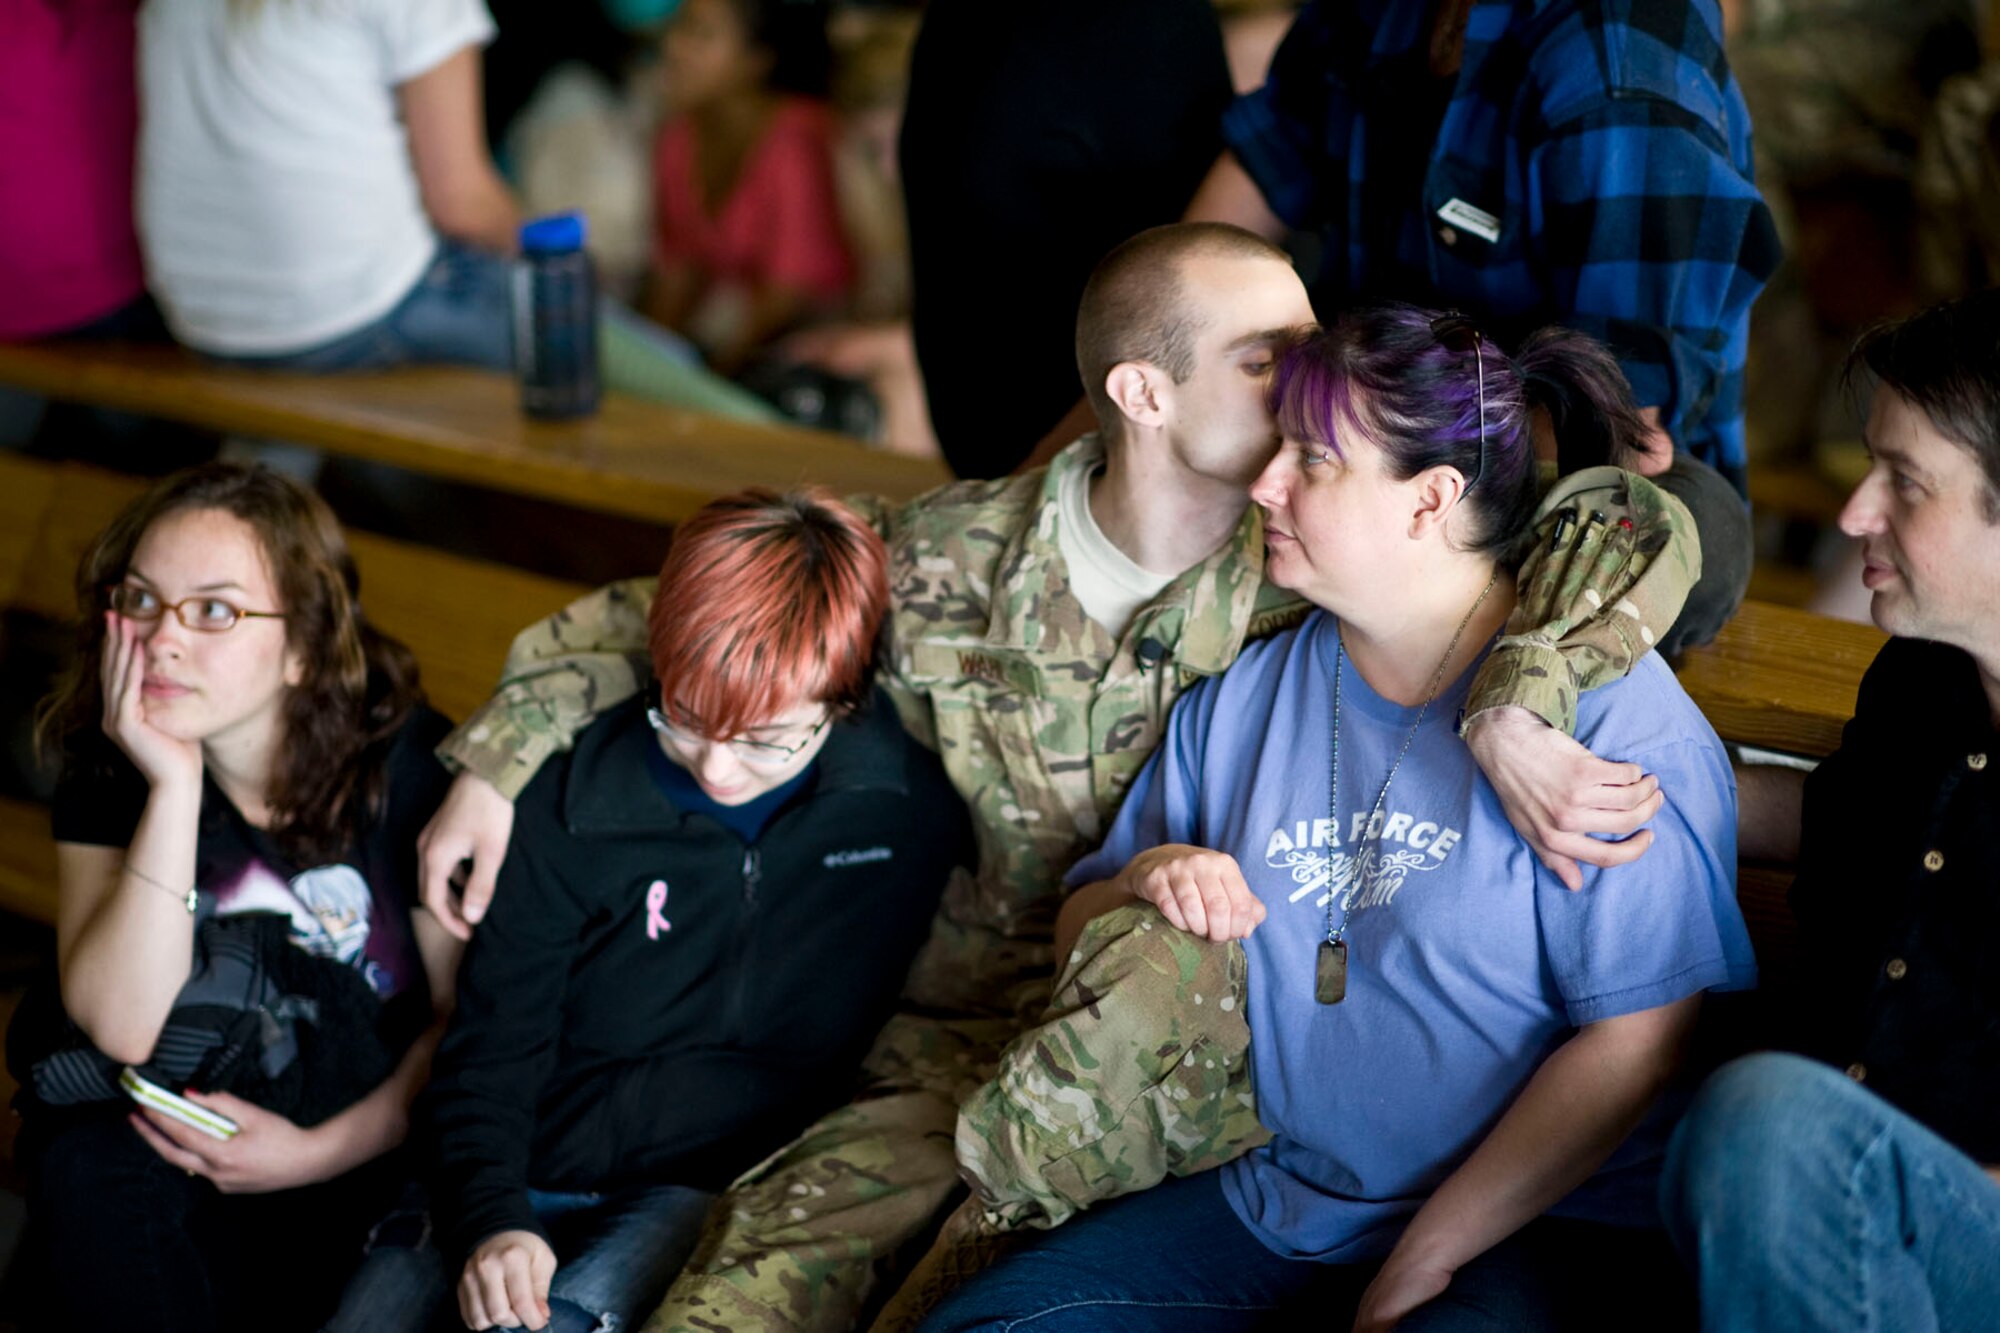 JOINT BASE ELMENDORF-RICHARDSON, Alaska - Airman 1st Class Steven Wahl, a helicopter crew chief with the Alaska Air National Guard's 176th Aircraft Maintenance Squadron, kisses his mom, Kim, and wraps his arm around his sister, Karissa, as he prepares to leave for Afghanistan May 28, 2012. Wahl is flanked by his father, Nick, and his cousin, Tiffany Stroman. More than 180 members of the Alaska Air National Guard's 176th Wing are deploying for about 120 days in support of Operation Enduring Freedom. (National Guard photo by Master Sgt. Shannon Oleson)